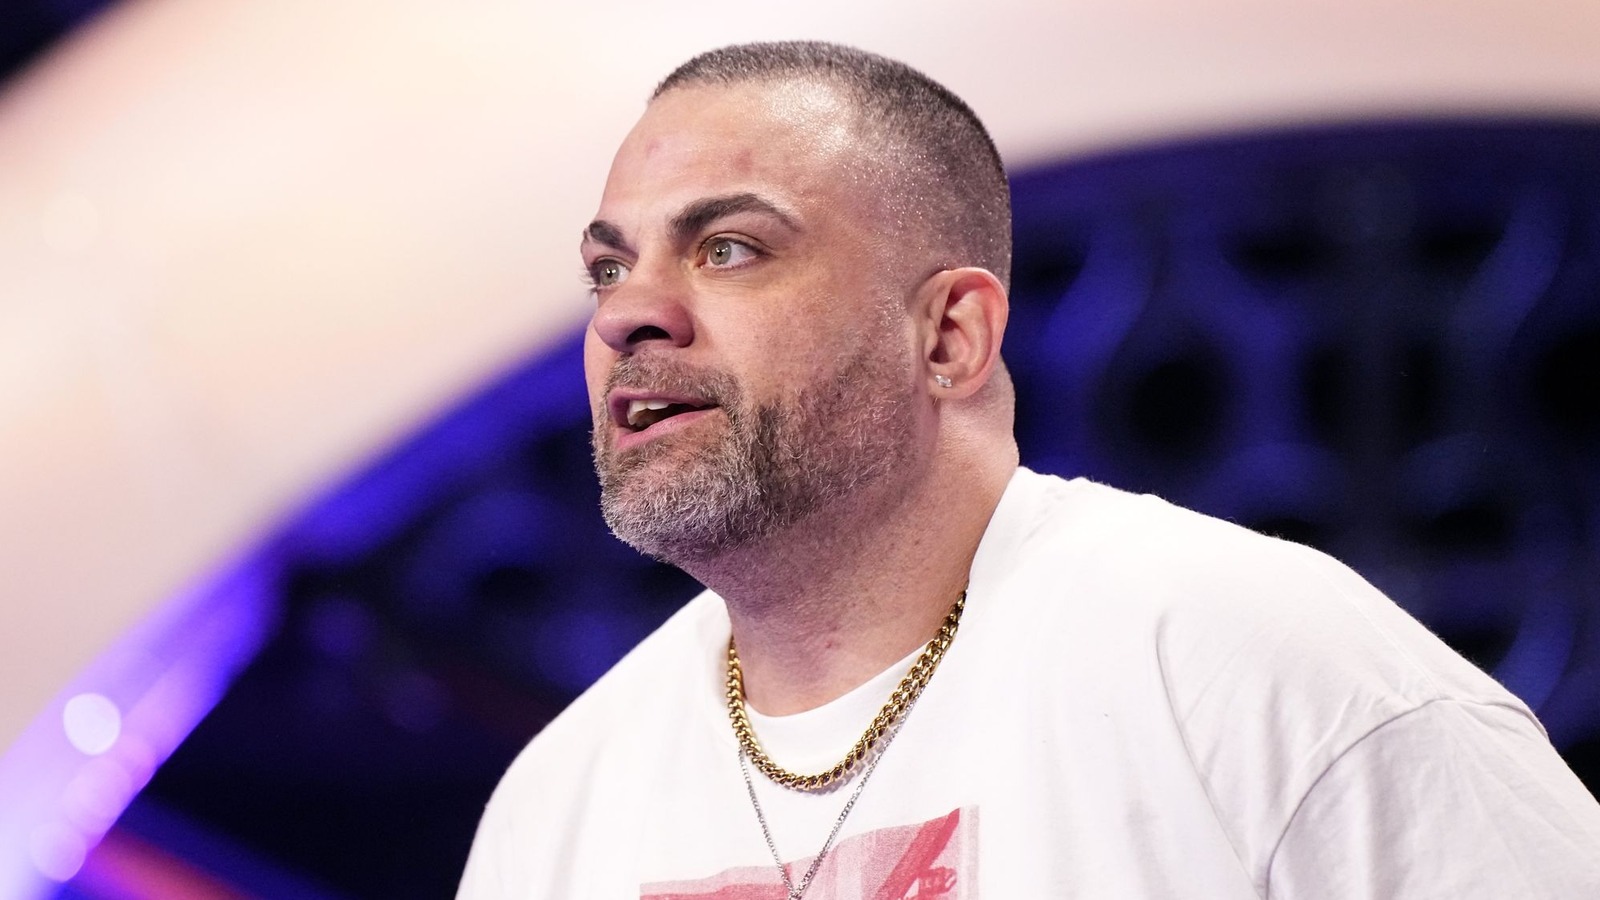 Backstage Details On Eddie Kingston's Injury, When He Could Return To AEW